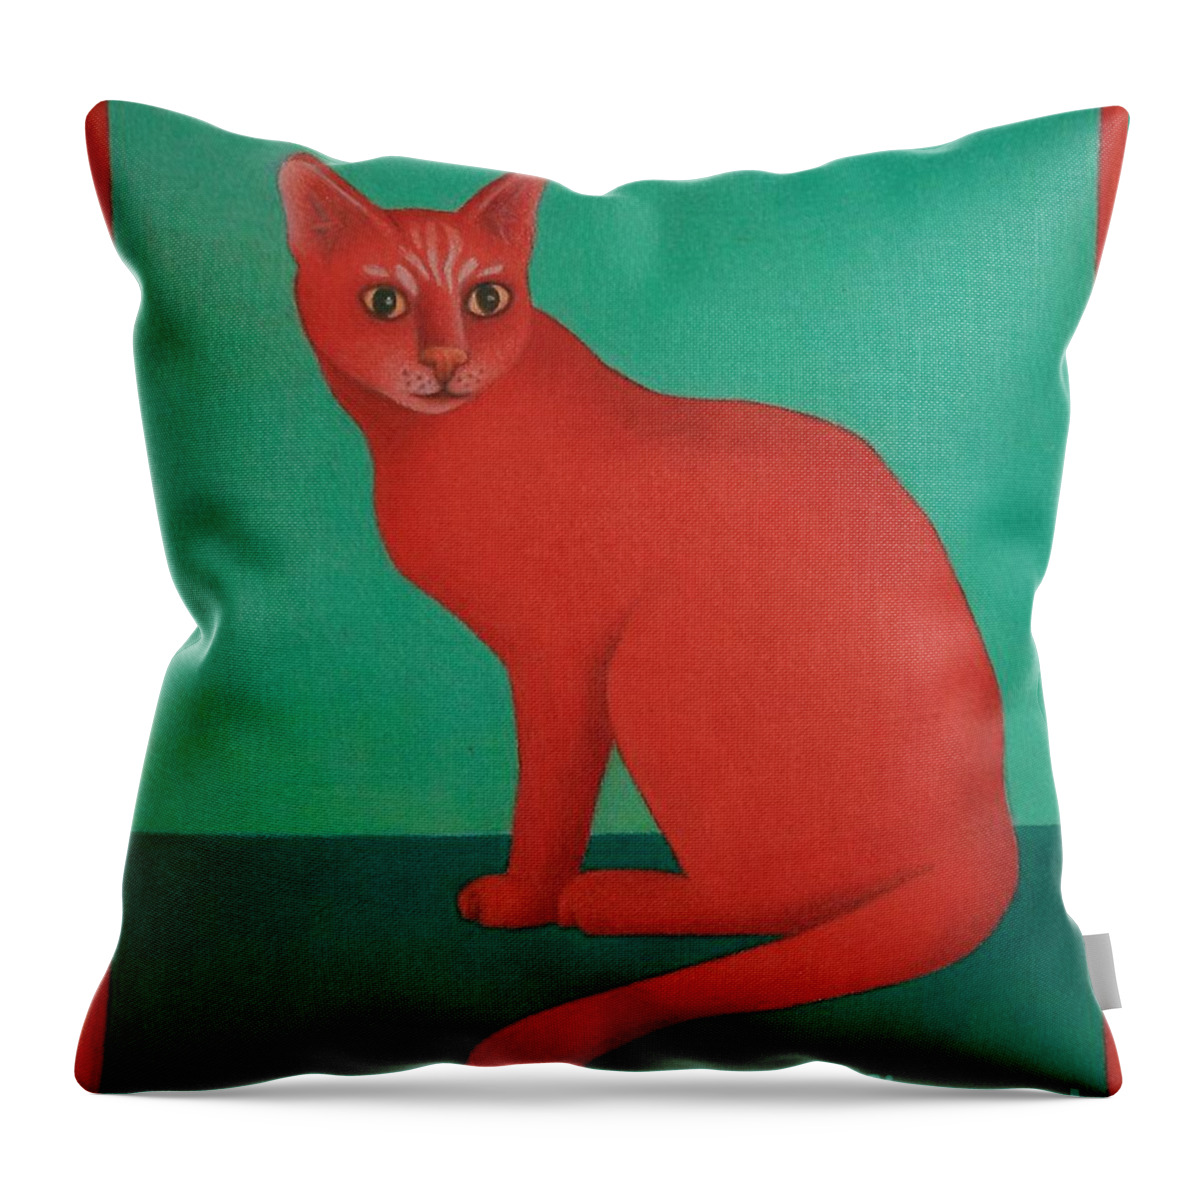 Primary Colors Throw Pillow featuring the painting Red Cat by Pamela Clements